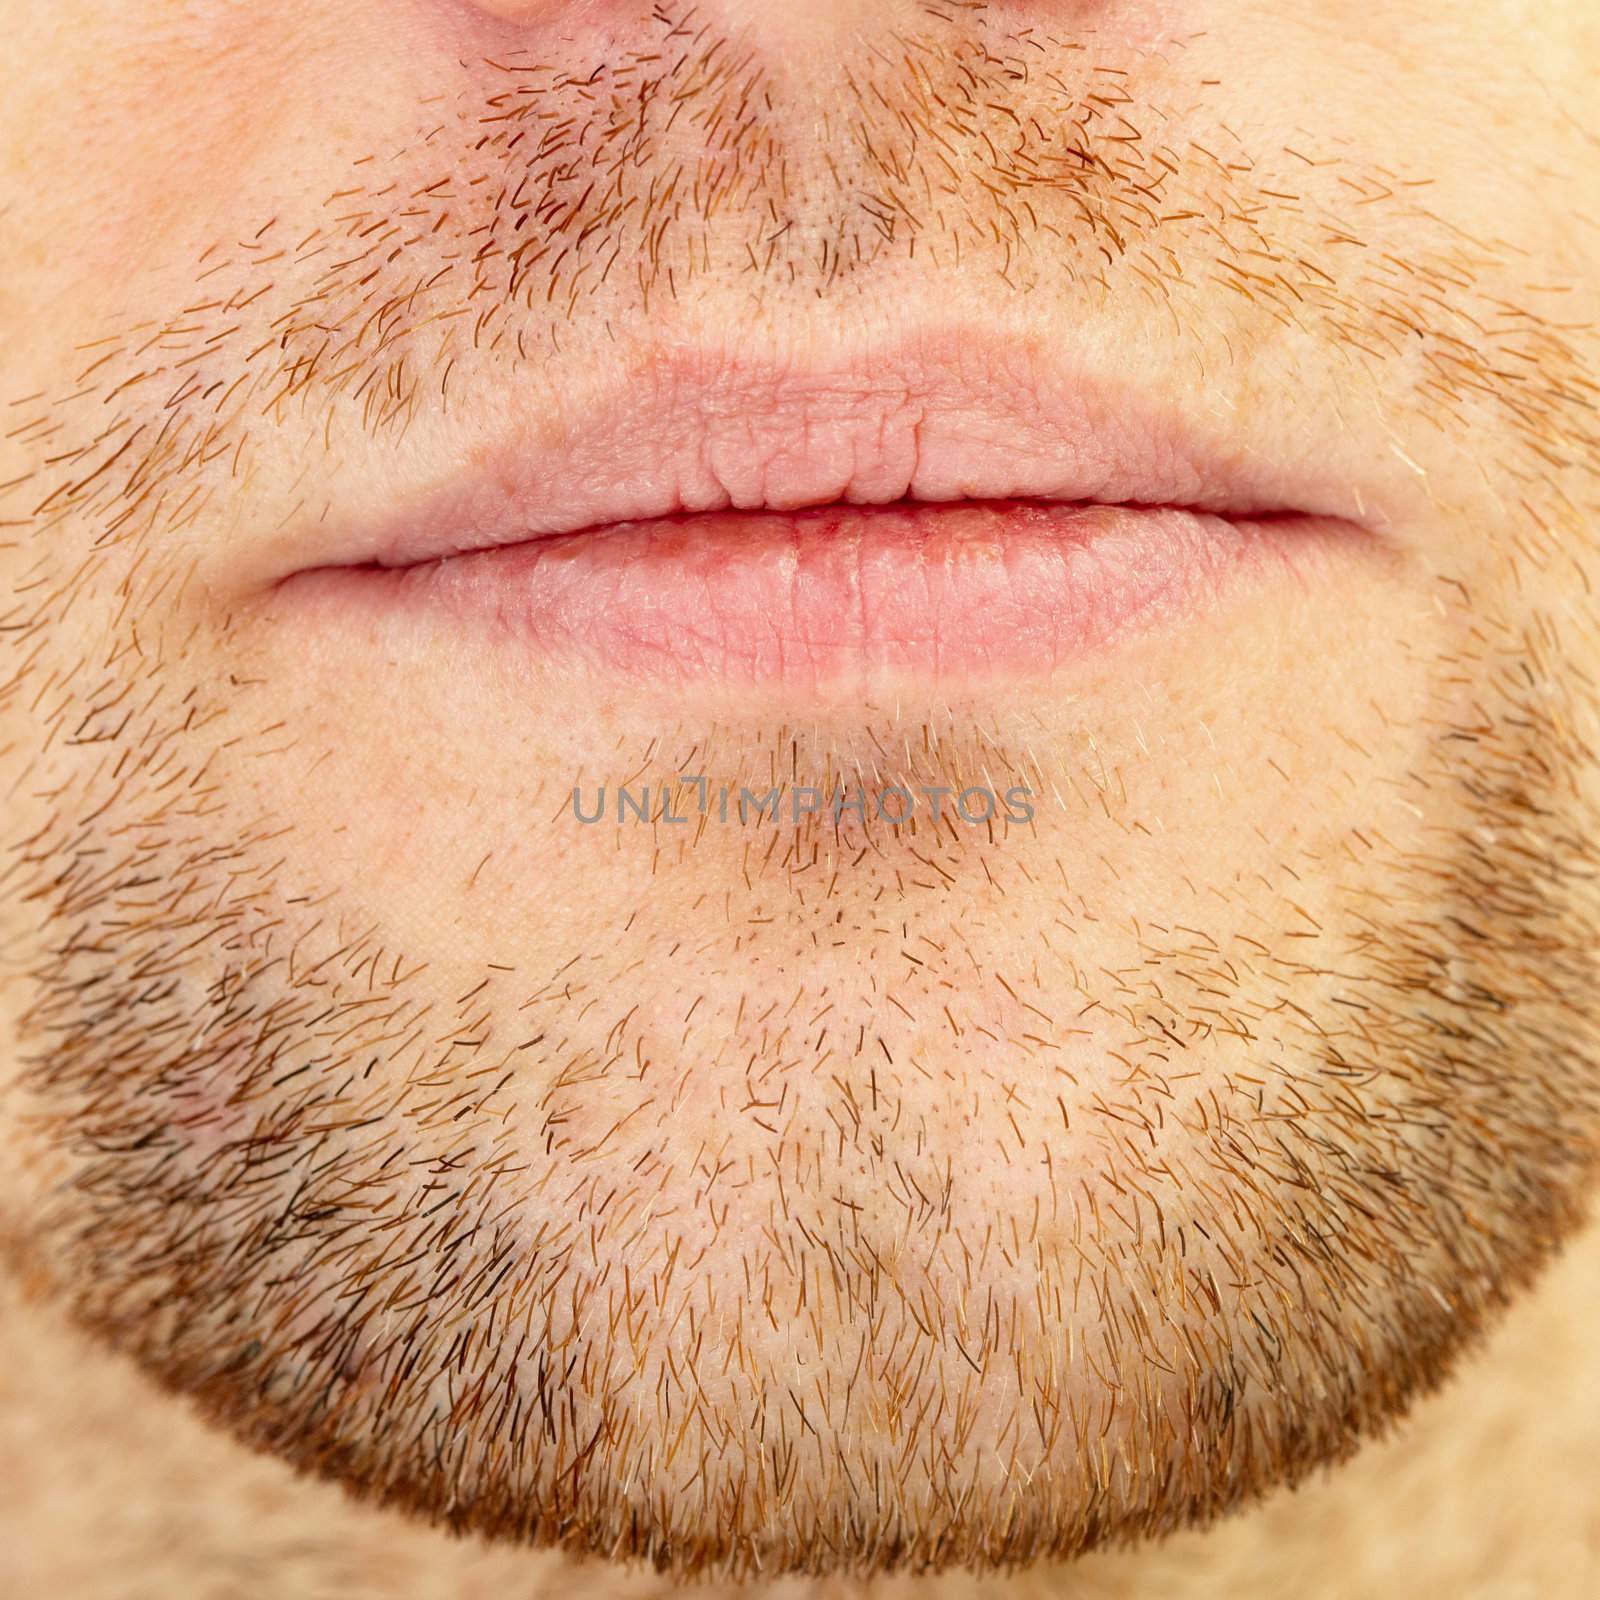 Beard and lips by pzaxe